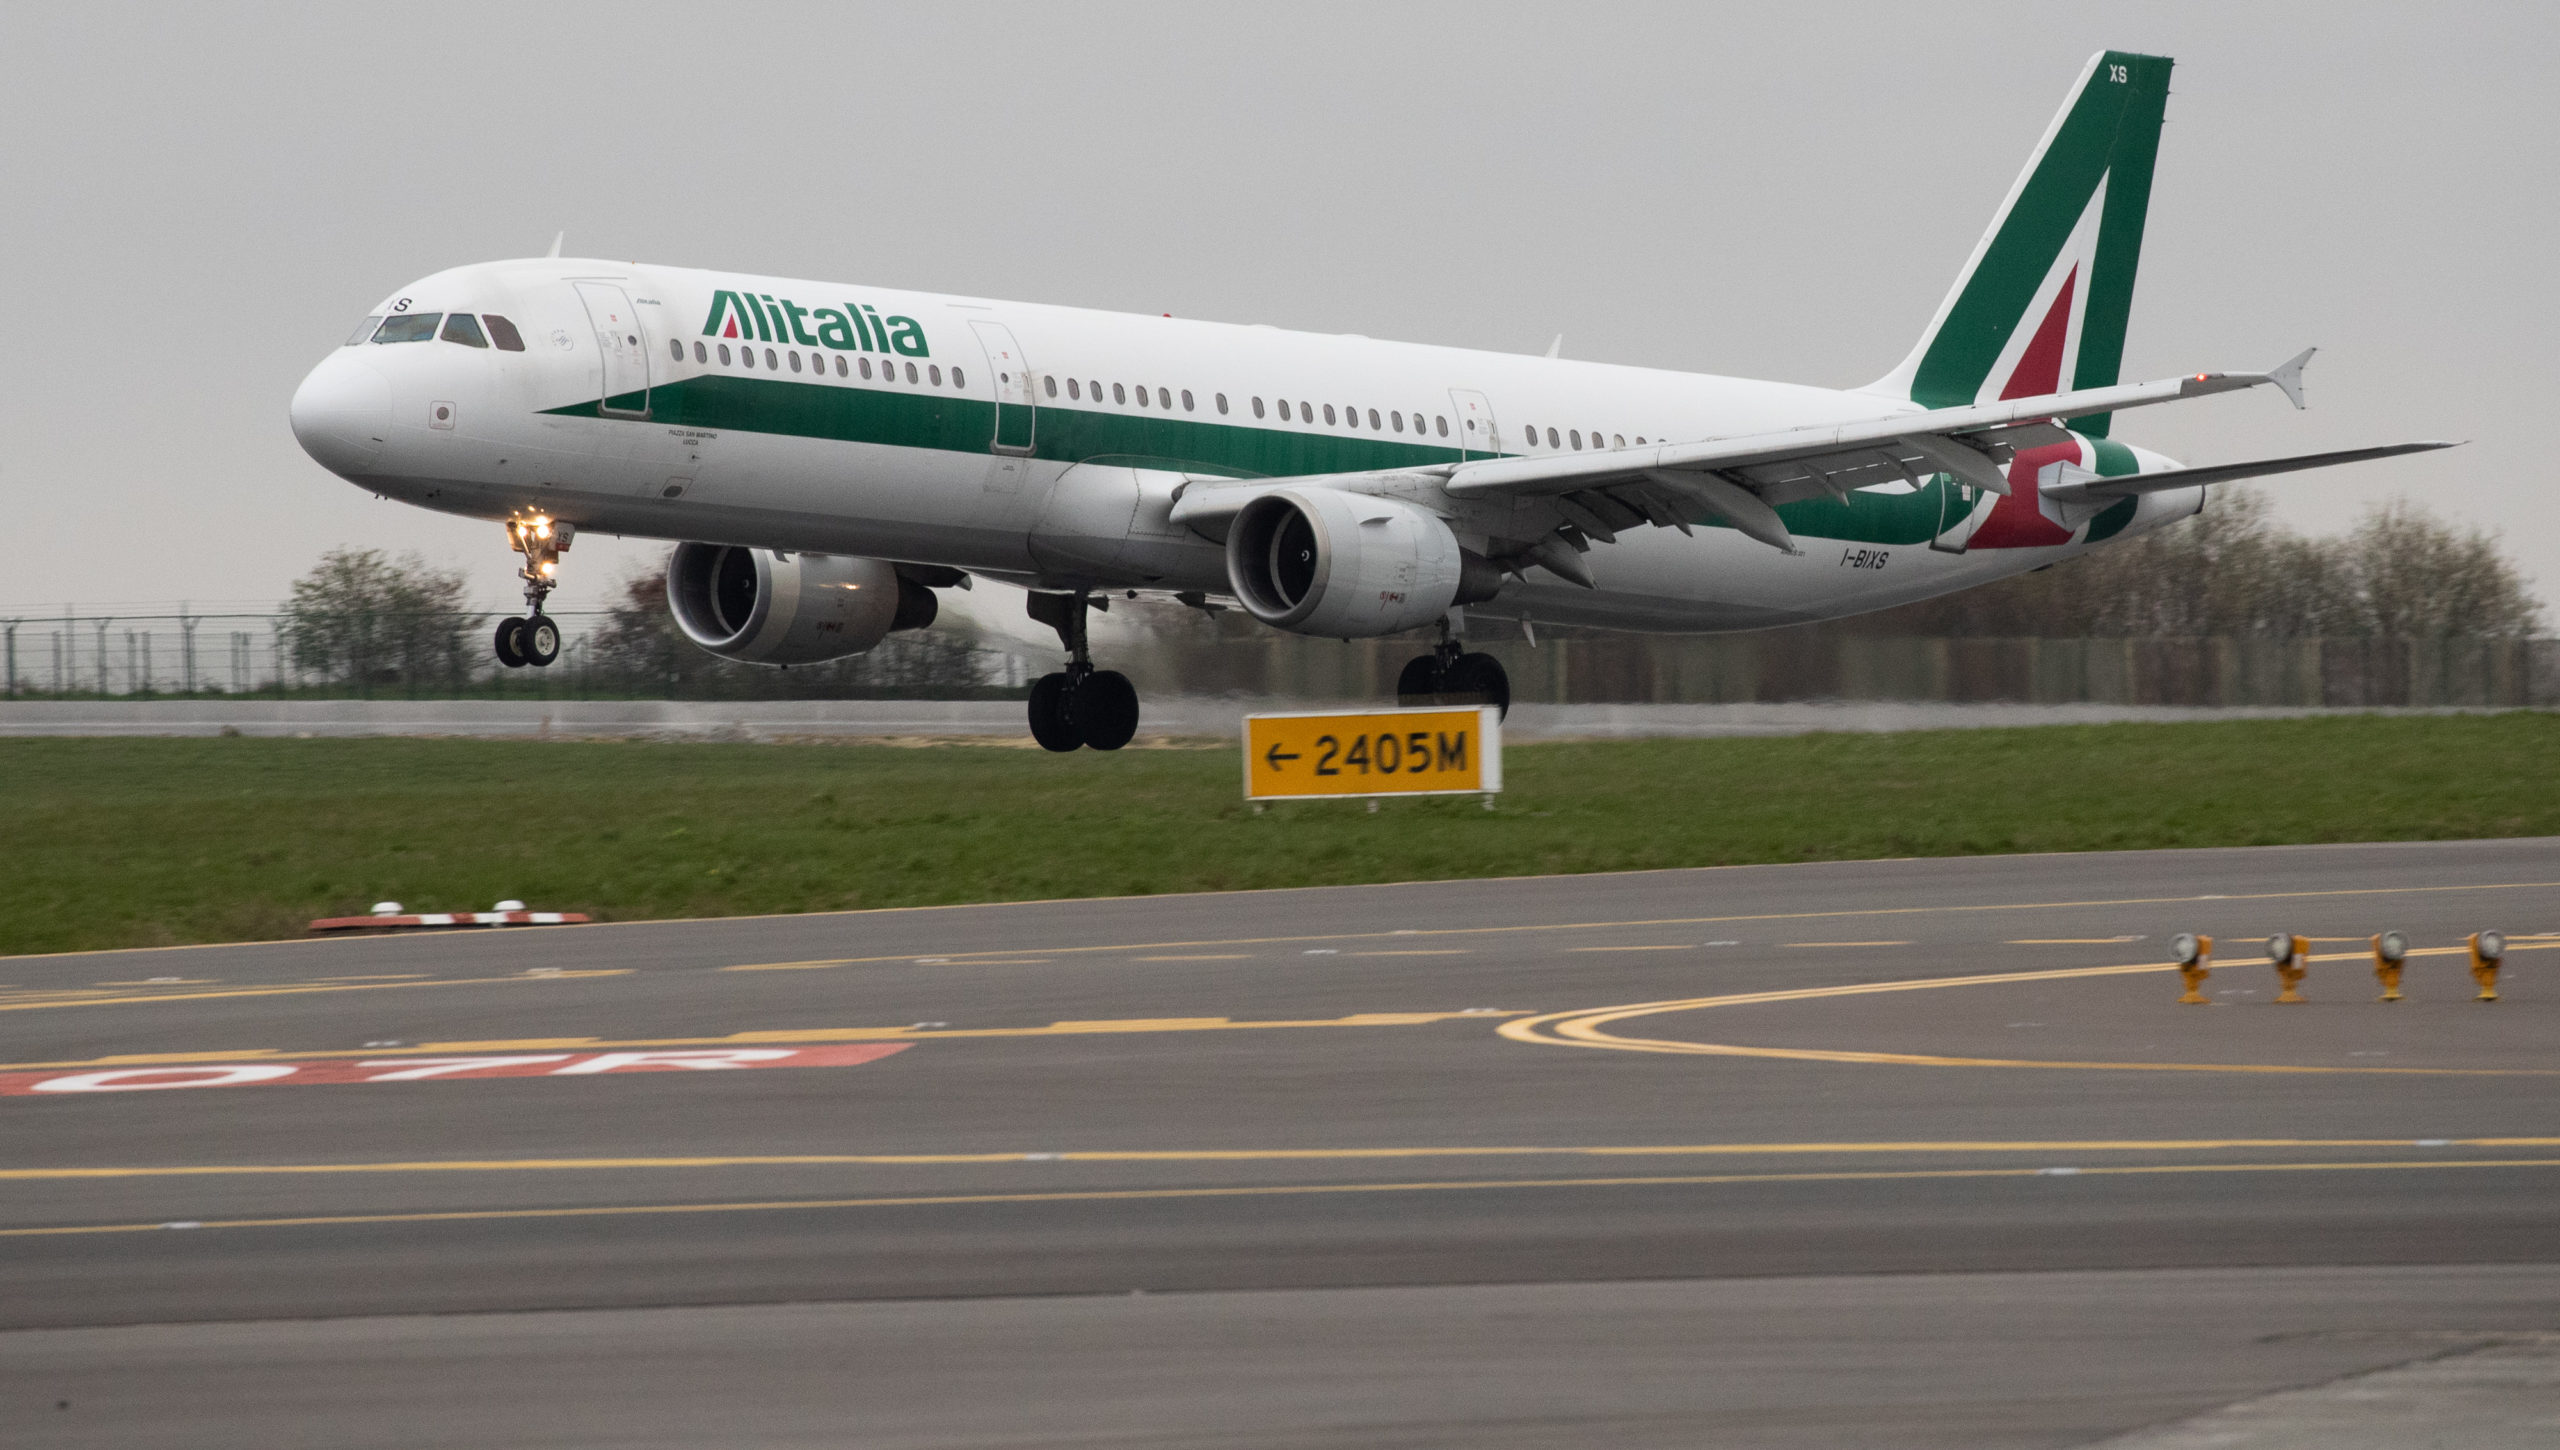 Is there a future for ITA (formerly Alitalia)?